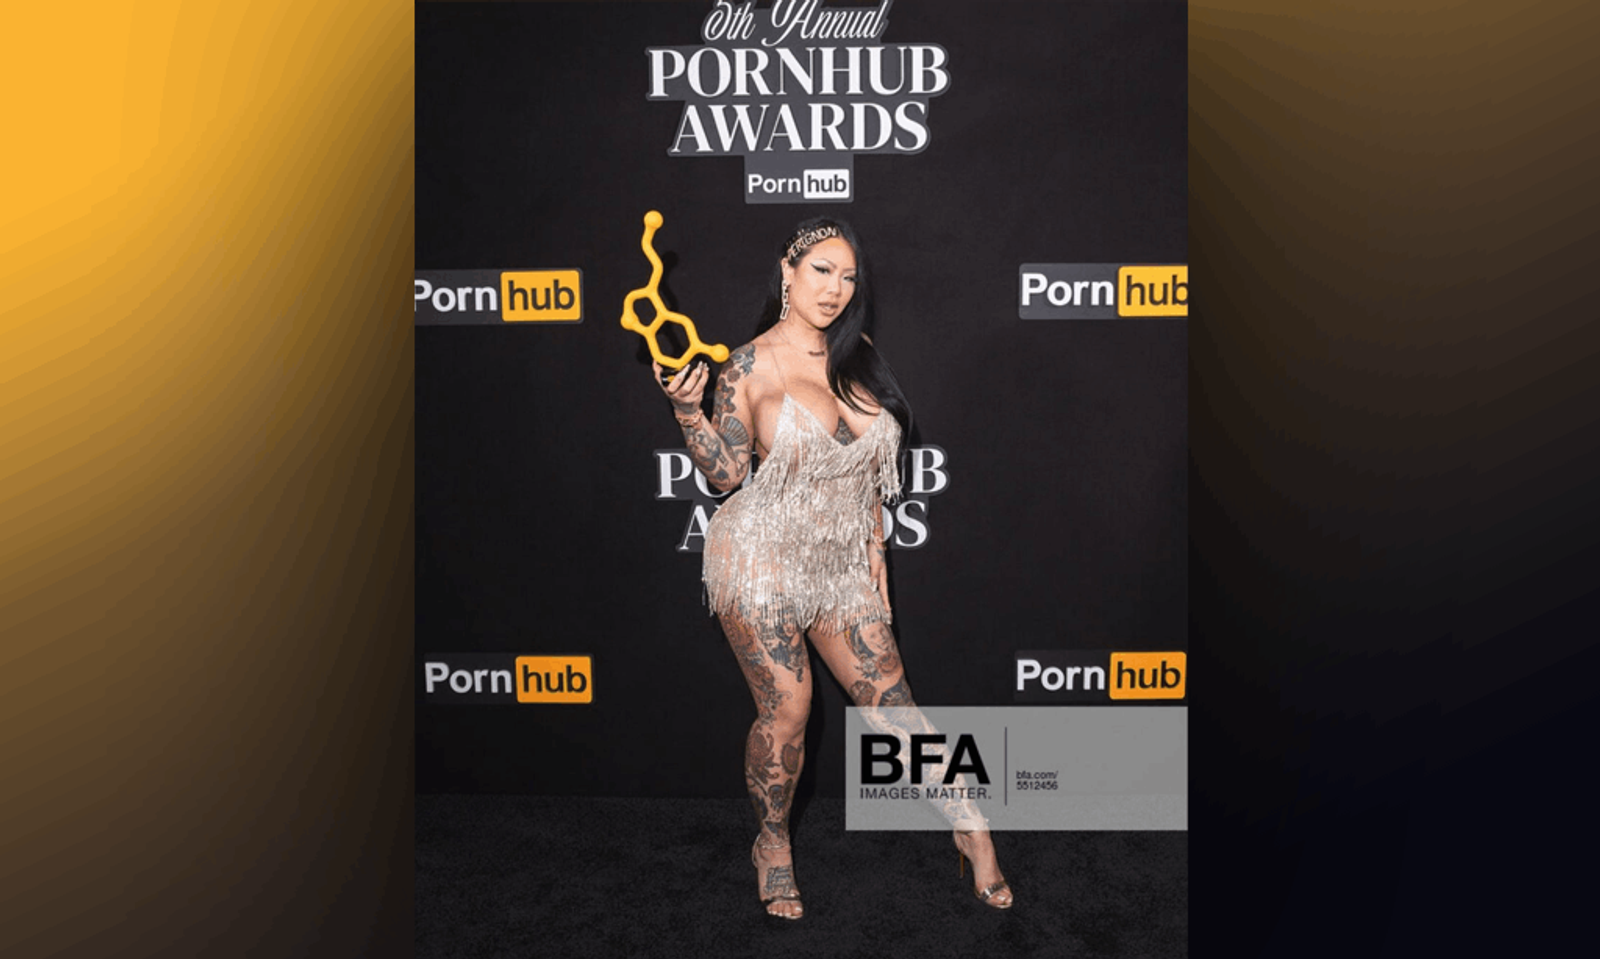 Connie Perignon Wins First Industry Award From Pornhub